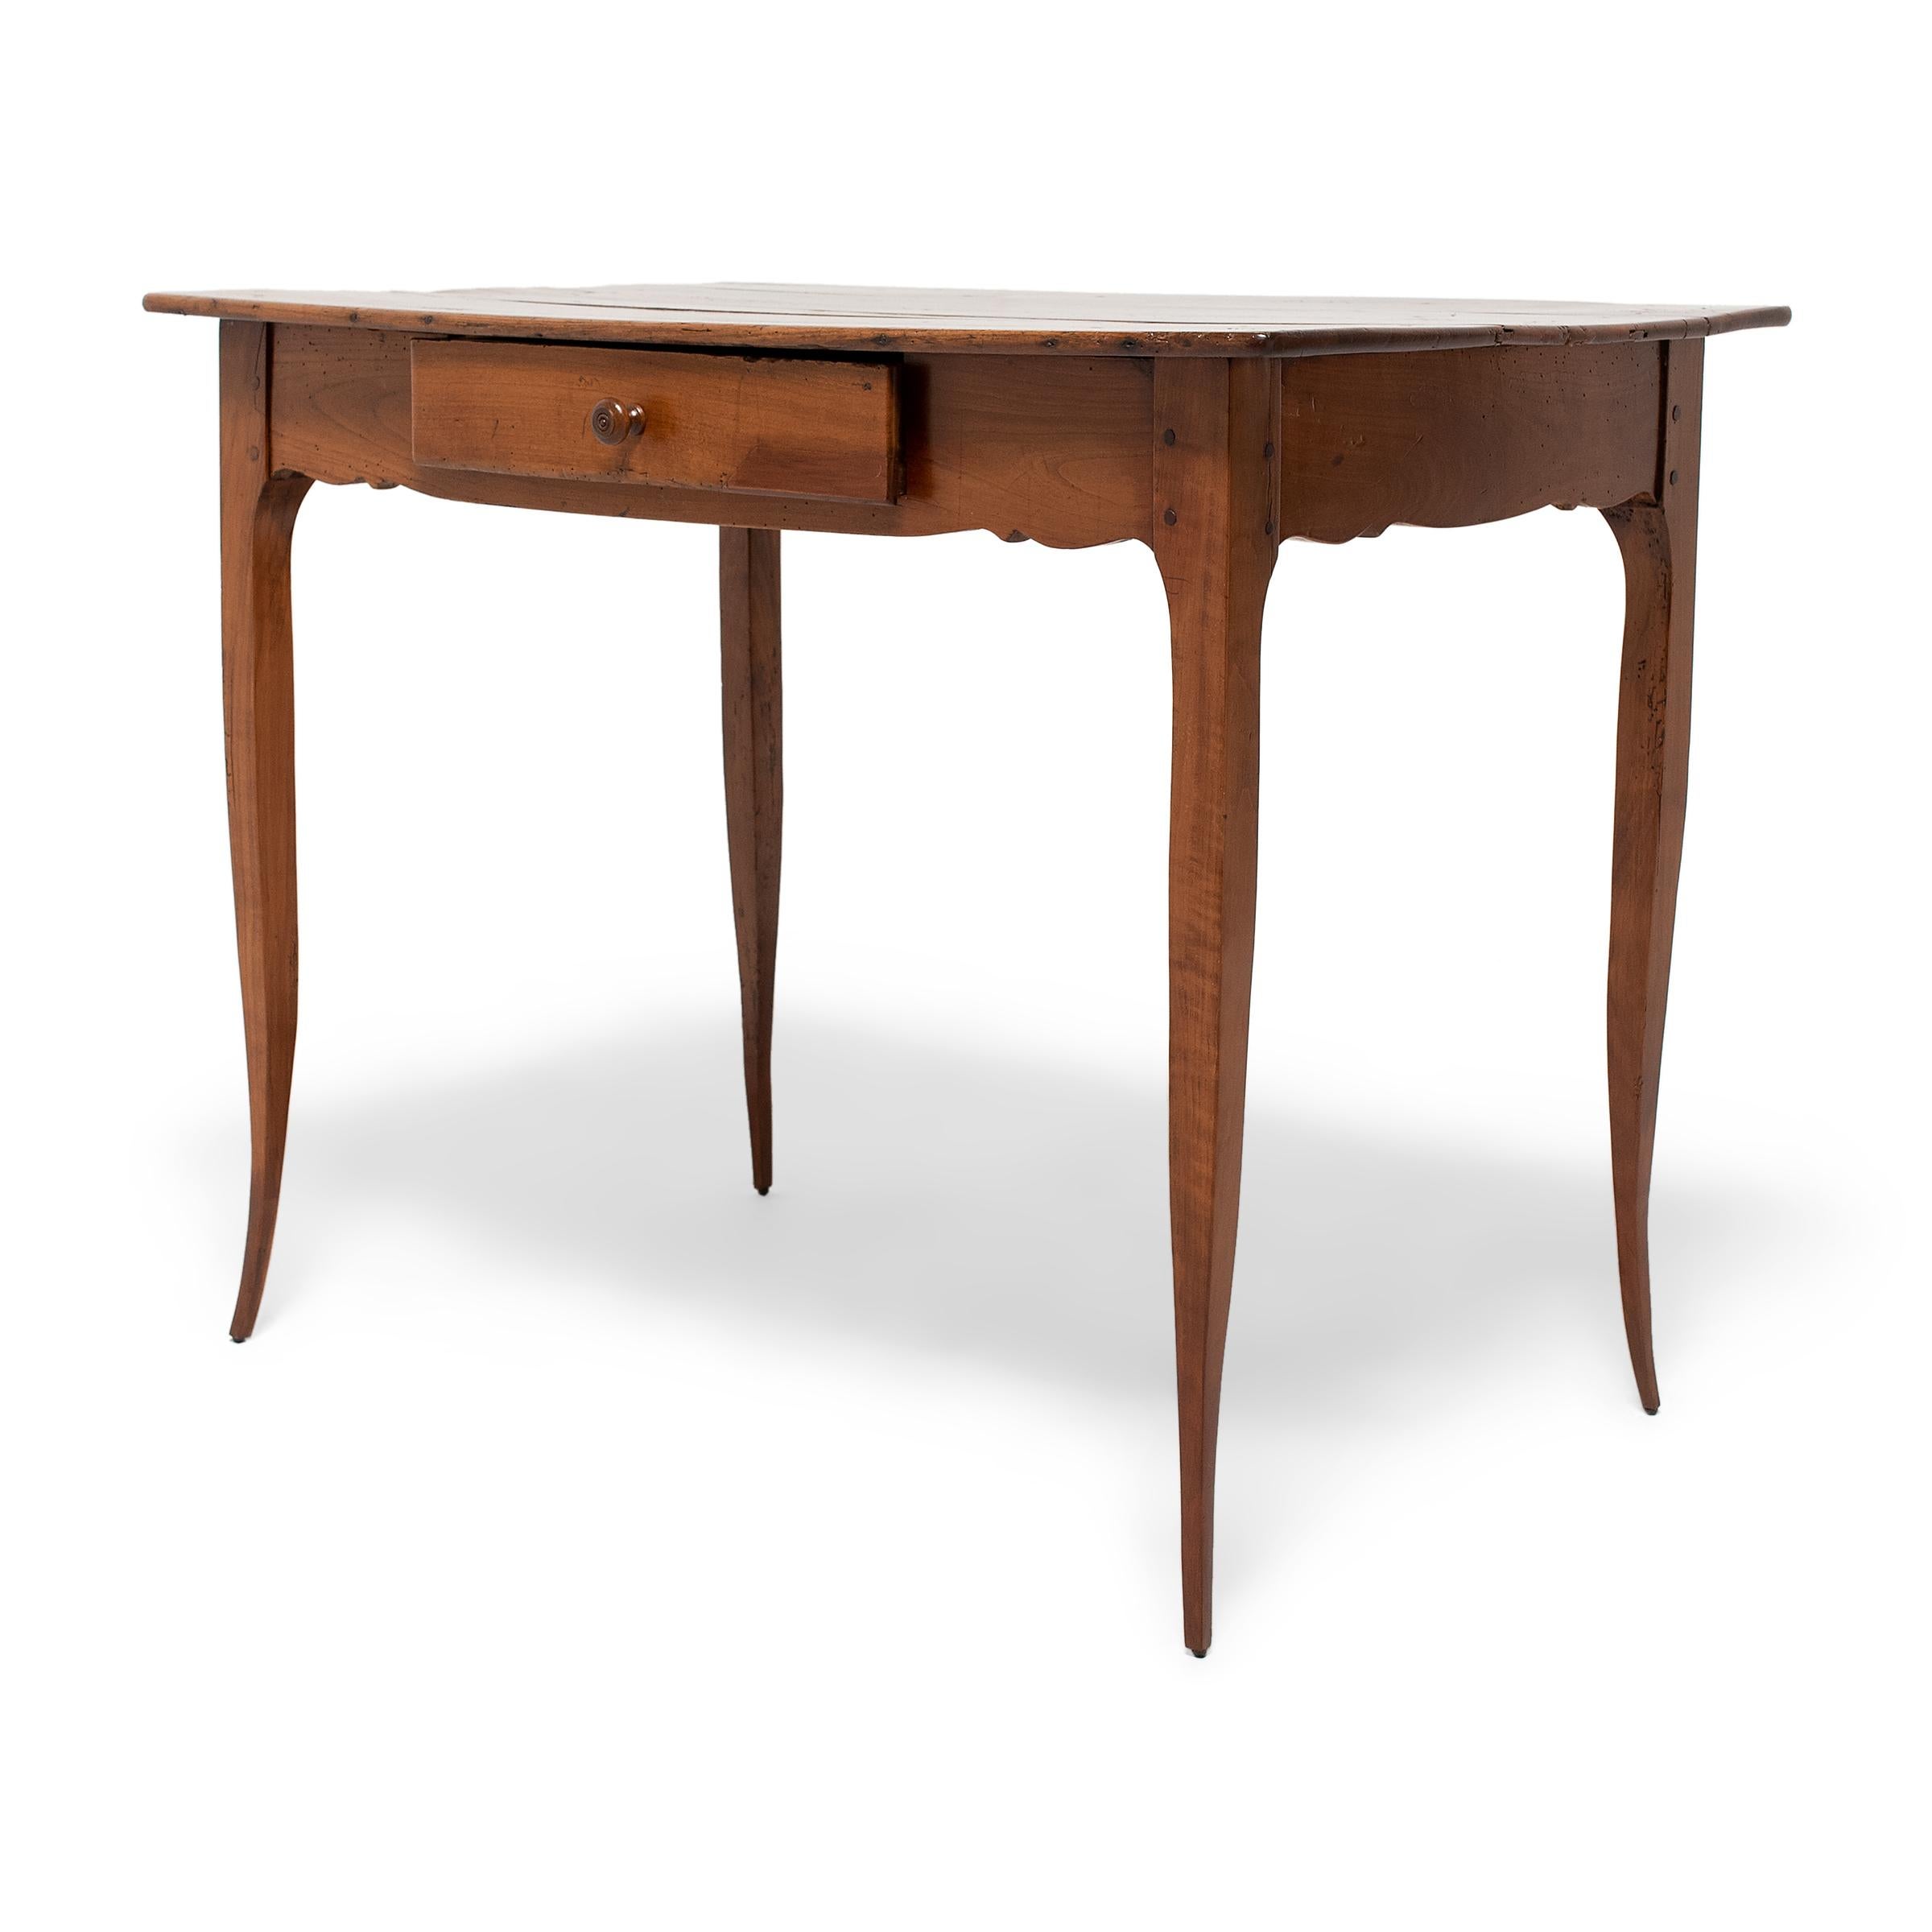 This refined Louis XV side table has an airy, lightweight design defined by slightly curving legs that taper dramatically to delicate, pointed feet. Crafted in France in the 18th century, the table has a thin, rectangular top comprised of three